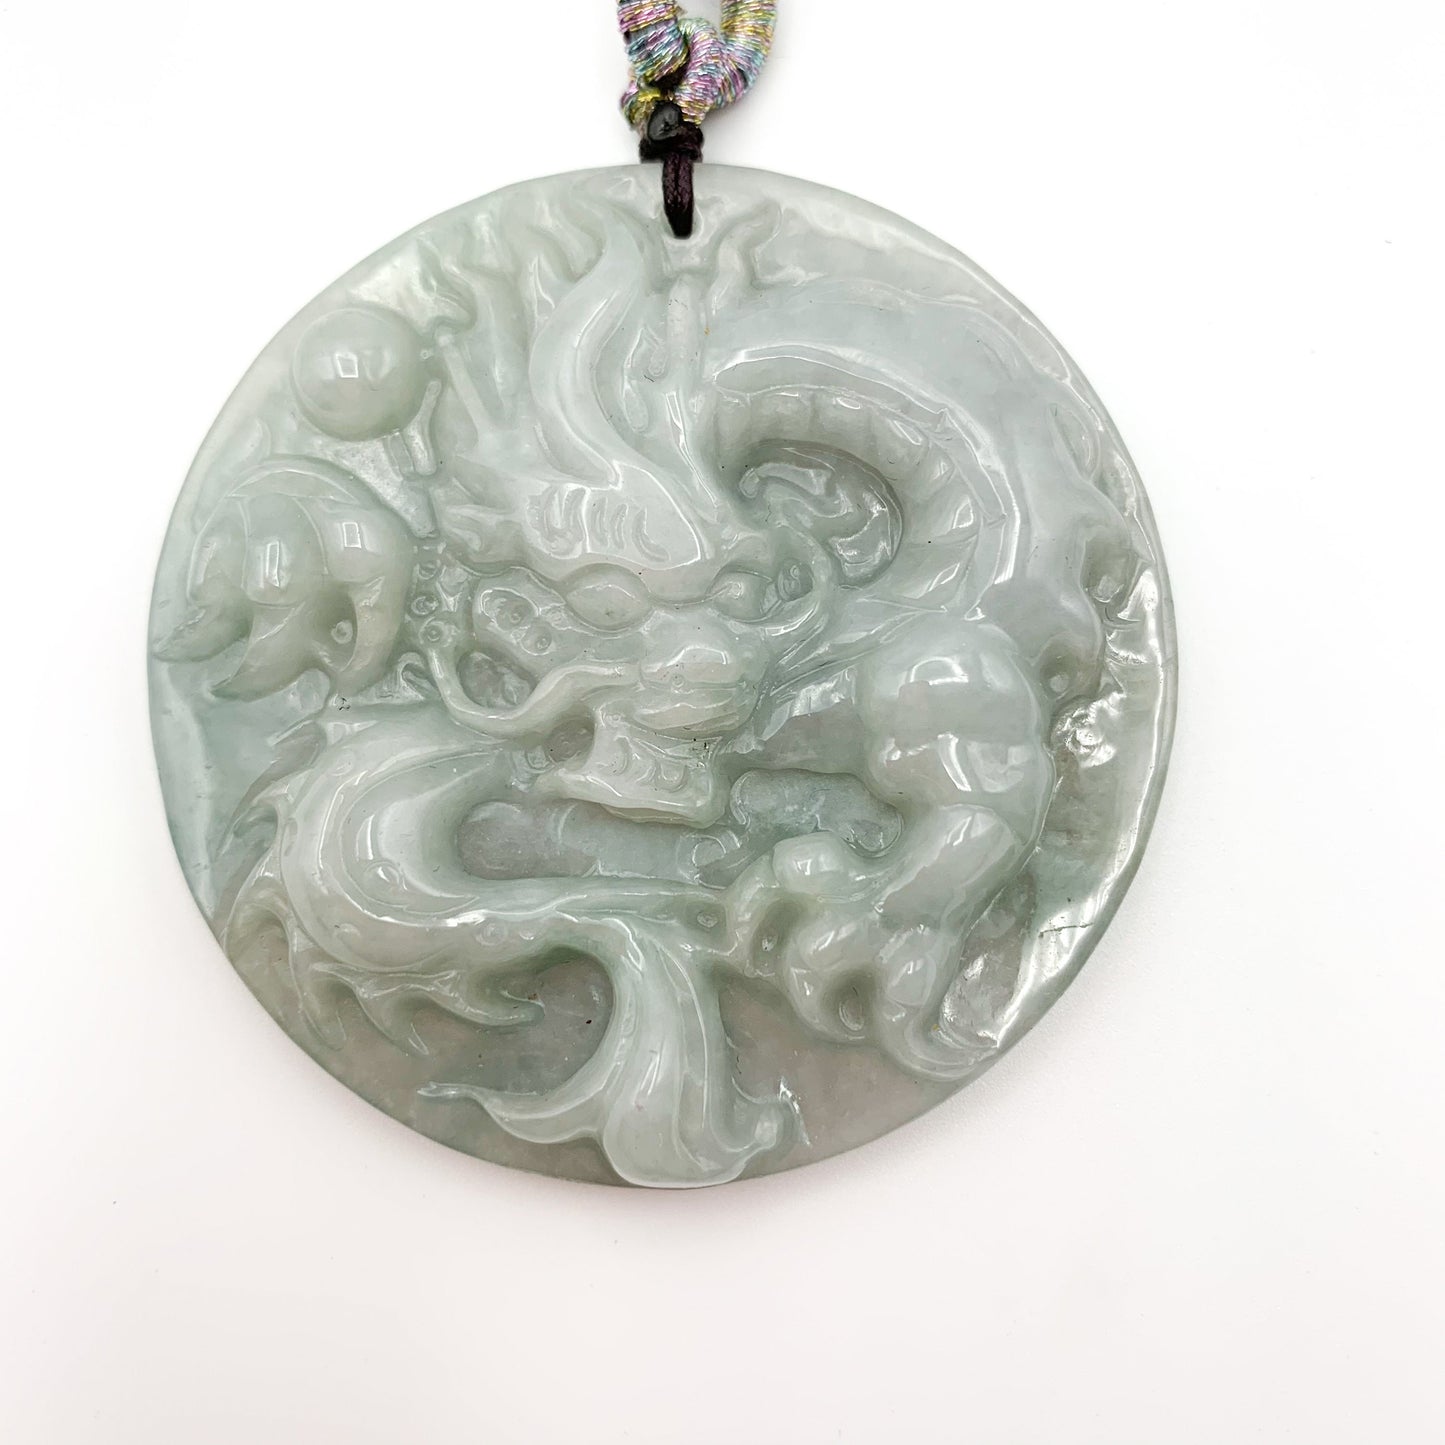 Jadeite Jade Dragon Chinese Zodiac Hand Carved Pendant Necklace, YJ-0321-0442954 - AriaDesignCollection